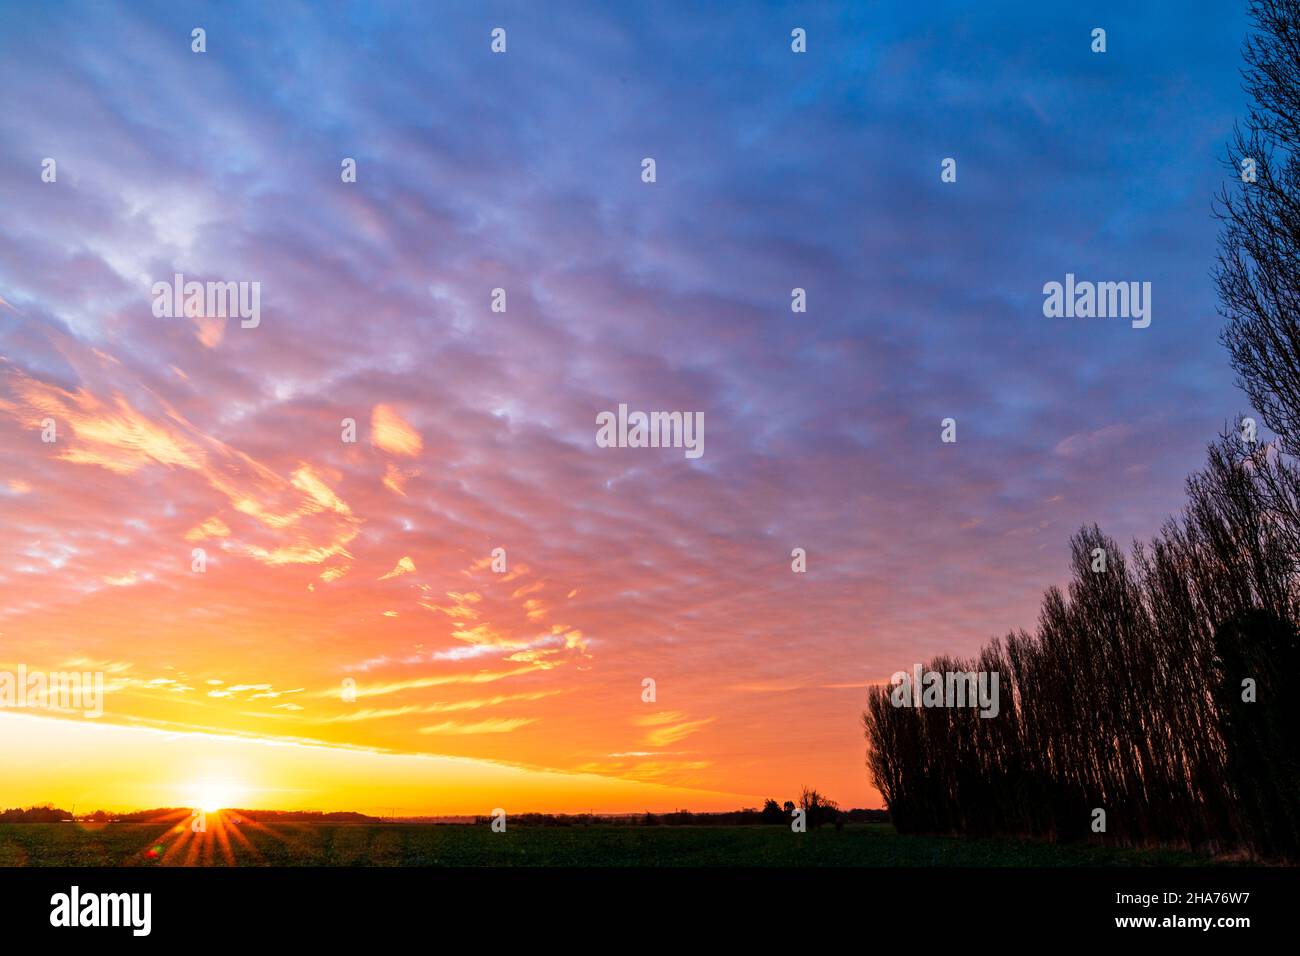 The sunrise over a field and a row of poplar trees. Horizon low in the frame with sky filled with altocumulus stratiformis clouds giving the appearance of the sky being on fire. Stock Photo